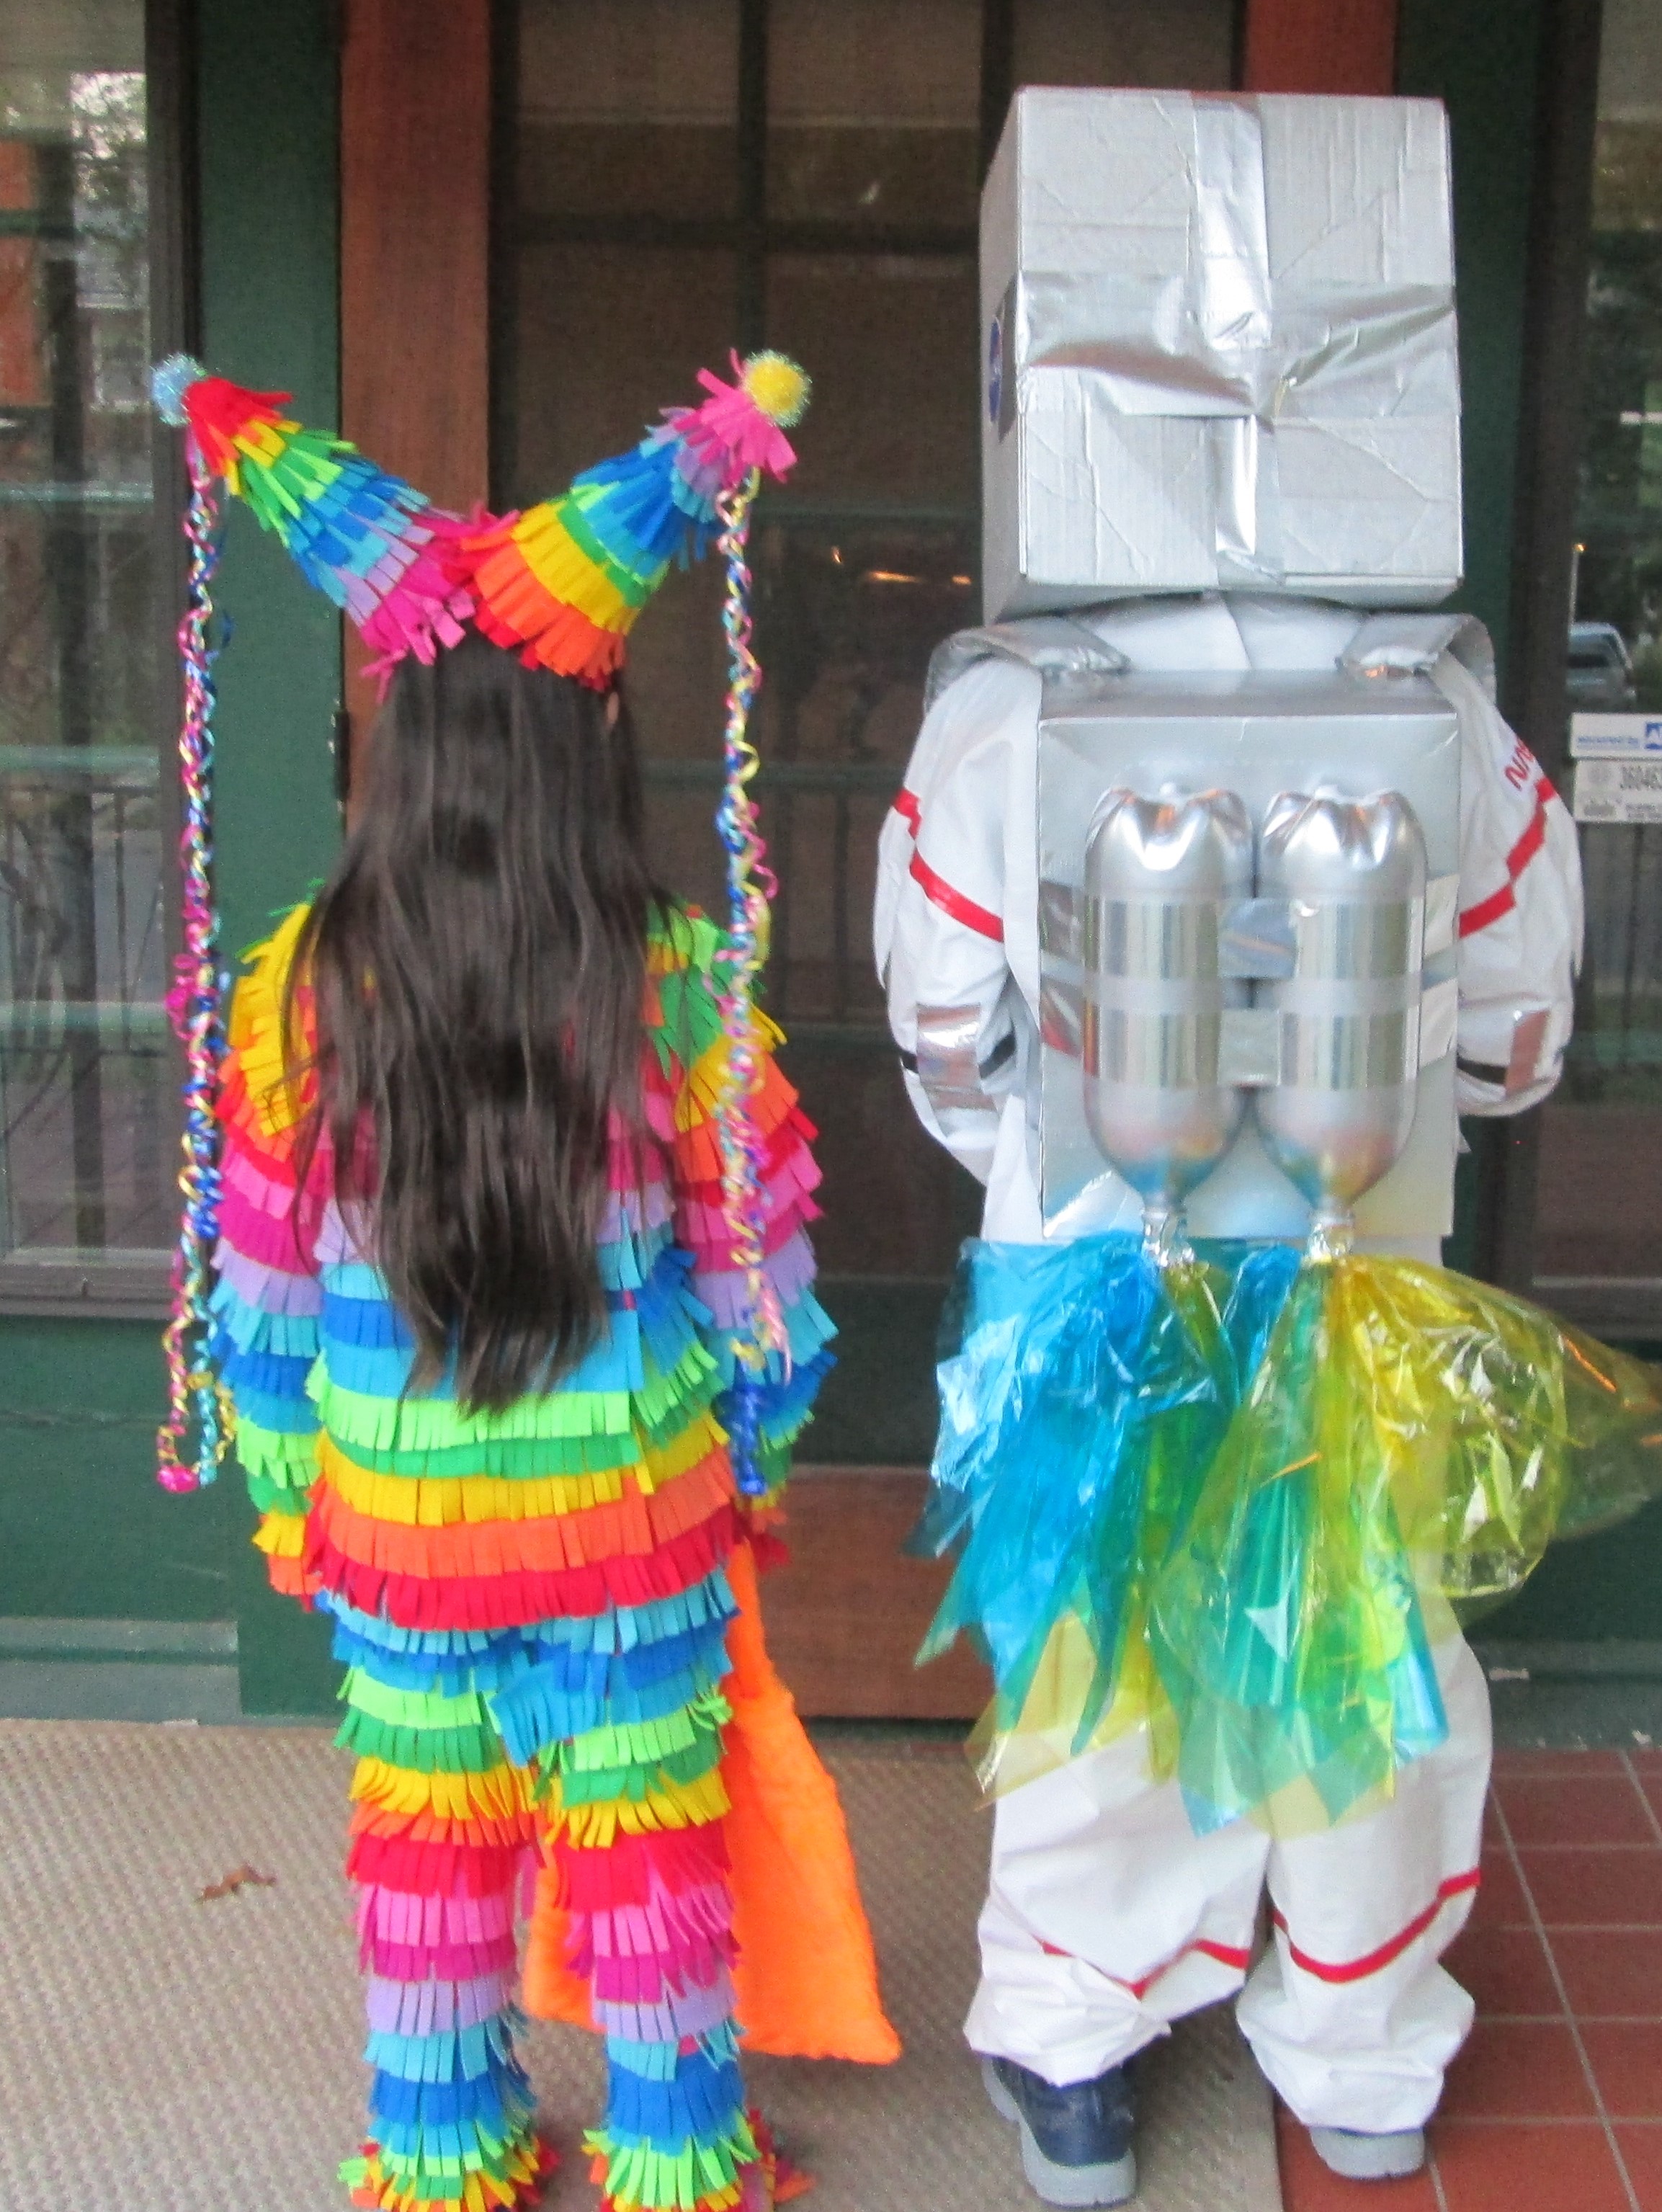 How to make a jet pack for an astronaut costume